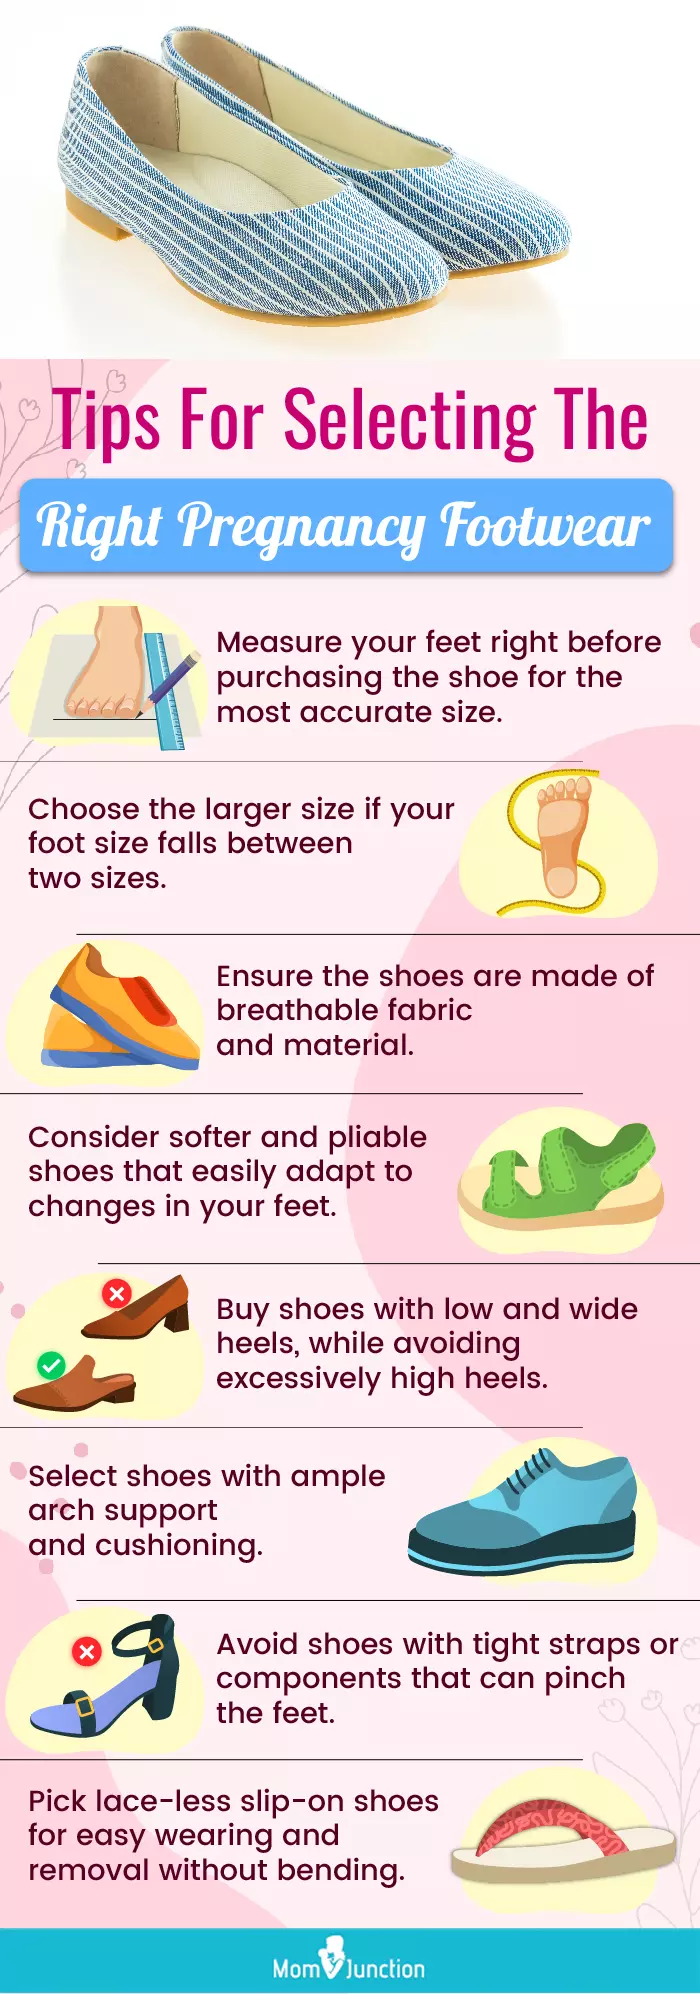 Tips For Selecting The Right Pregnancy Footwear (infographic)